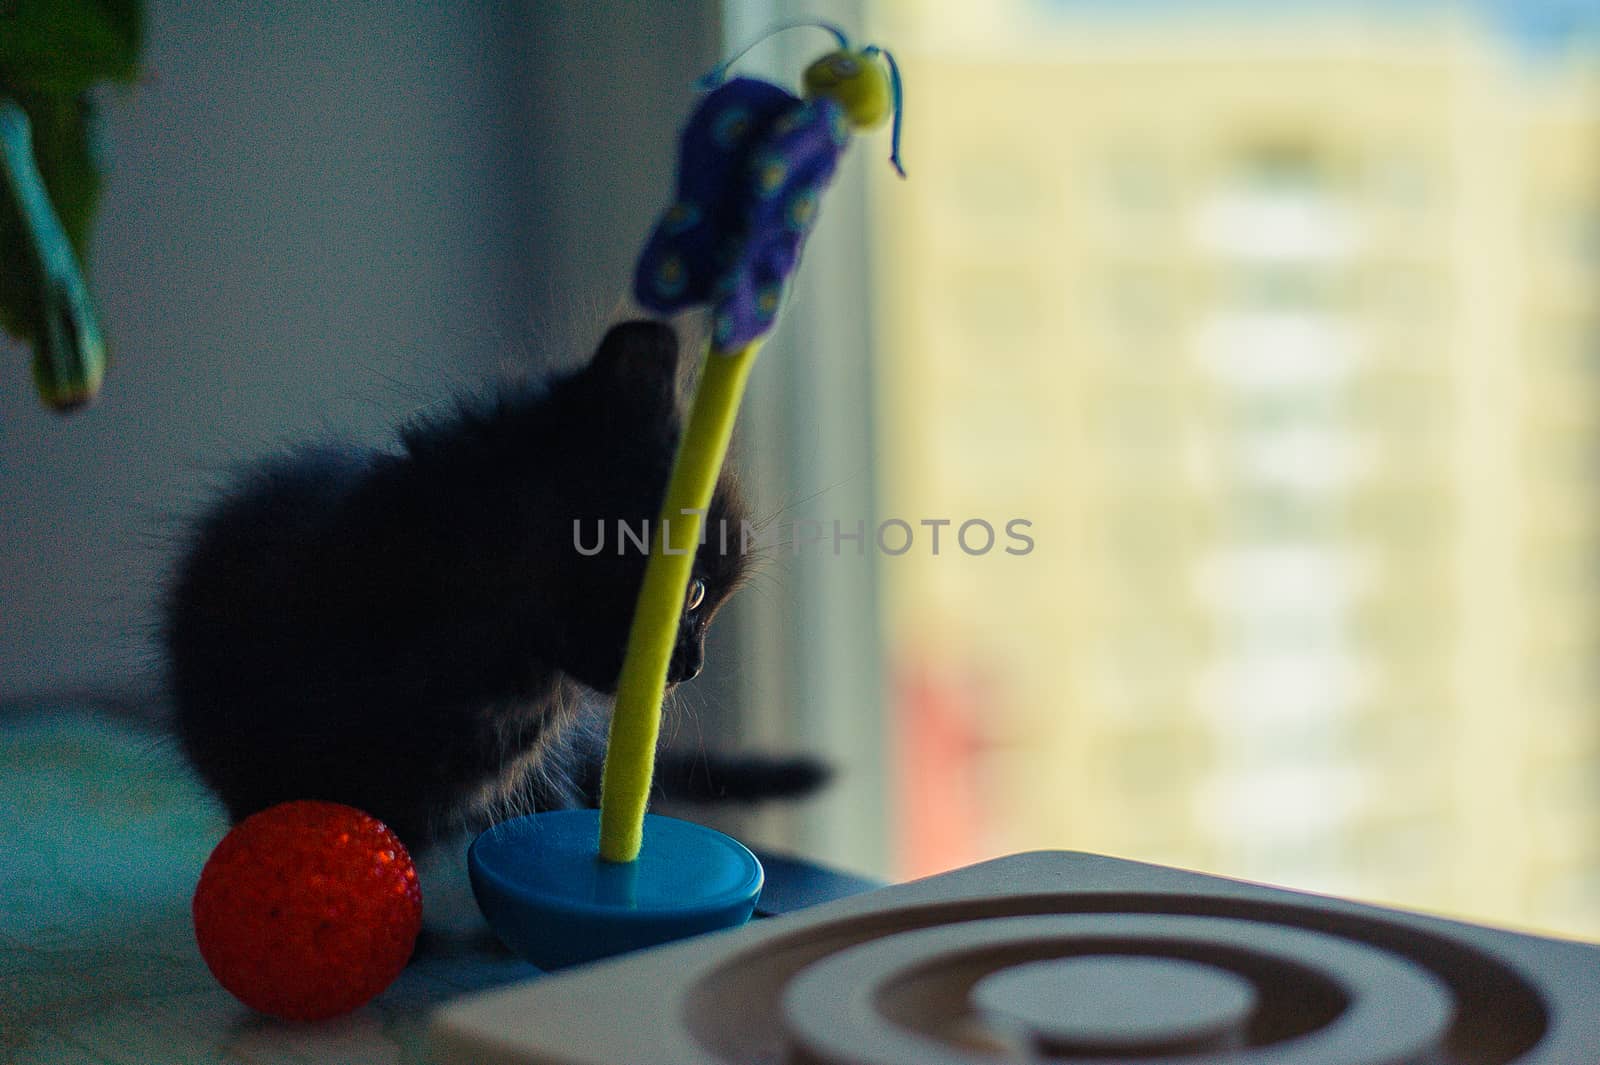 black kitten is played with a roly-poly toy and a red ball on the table near the window by chernobrovin